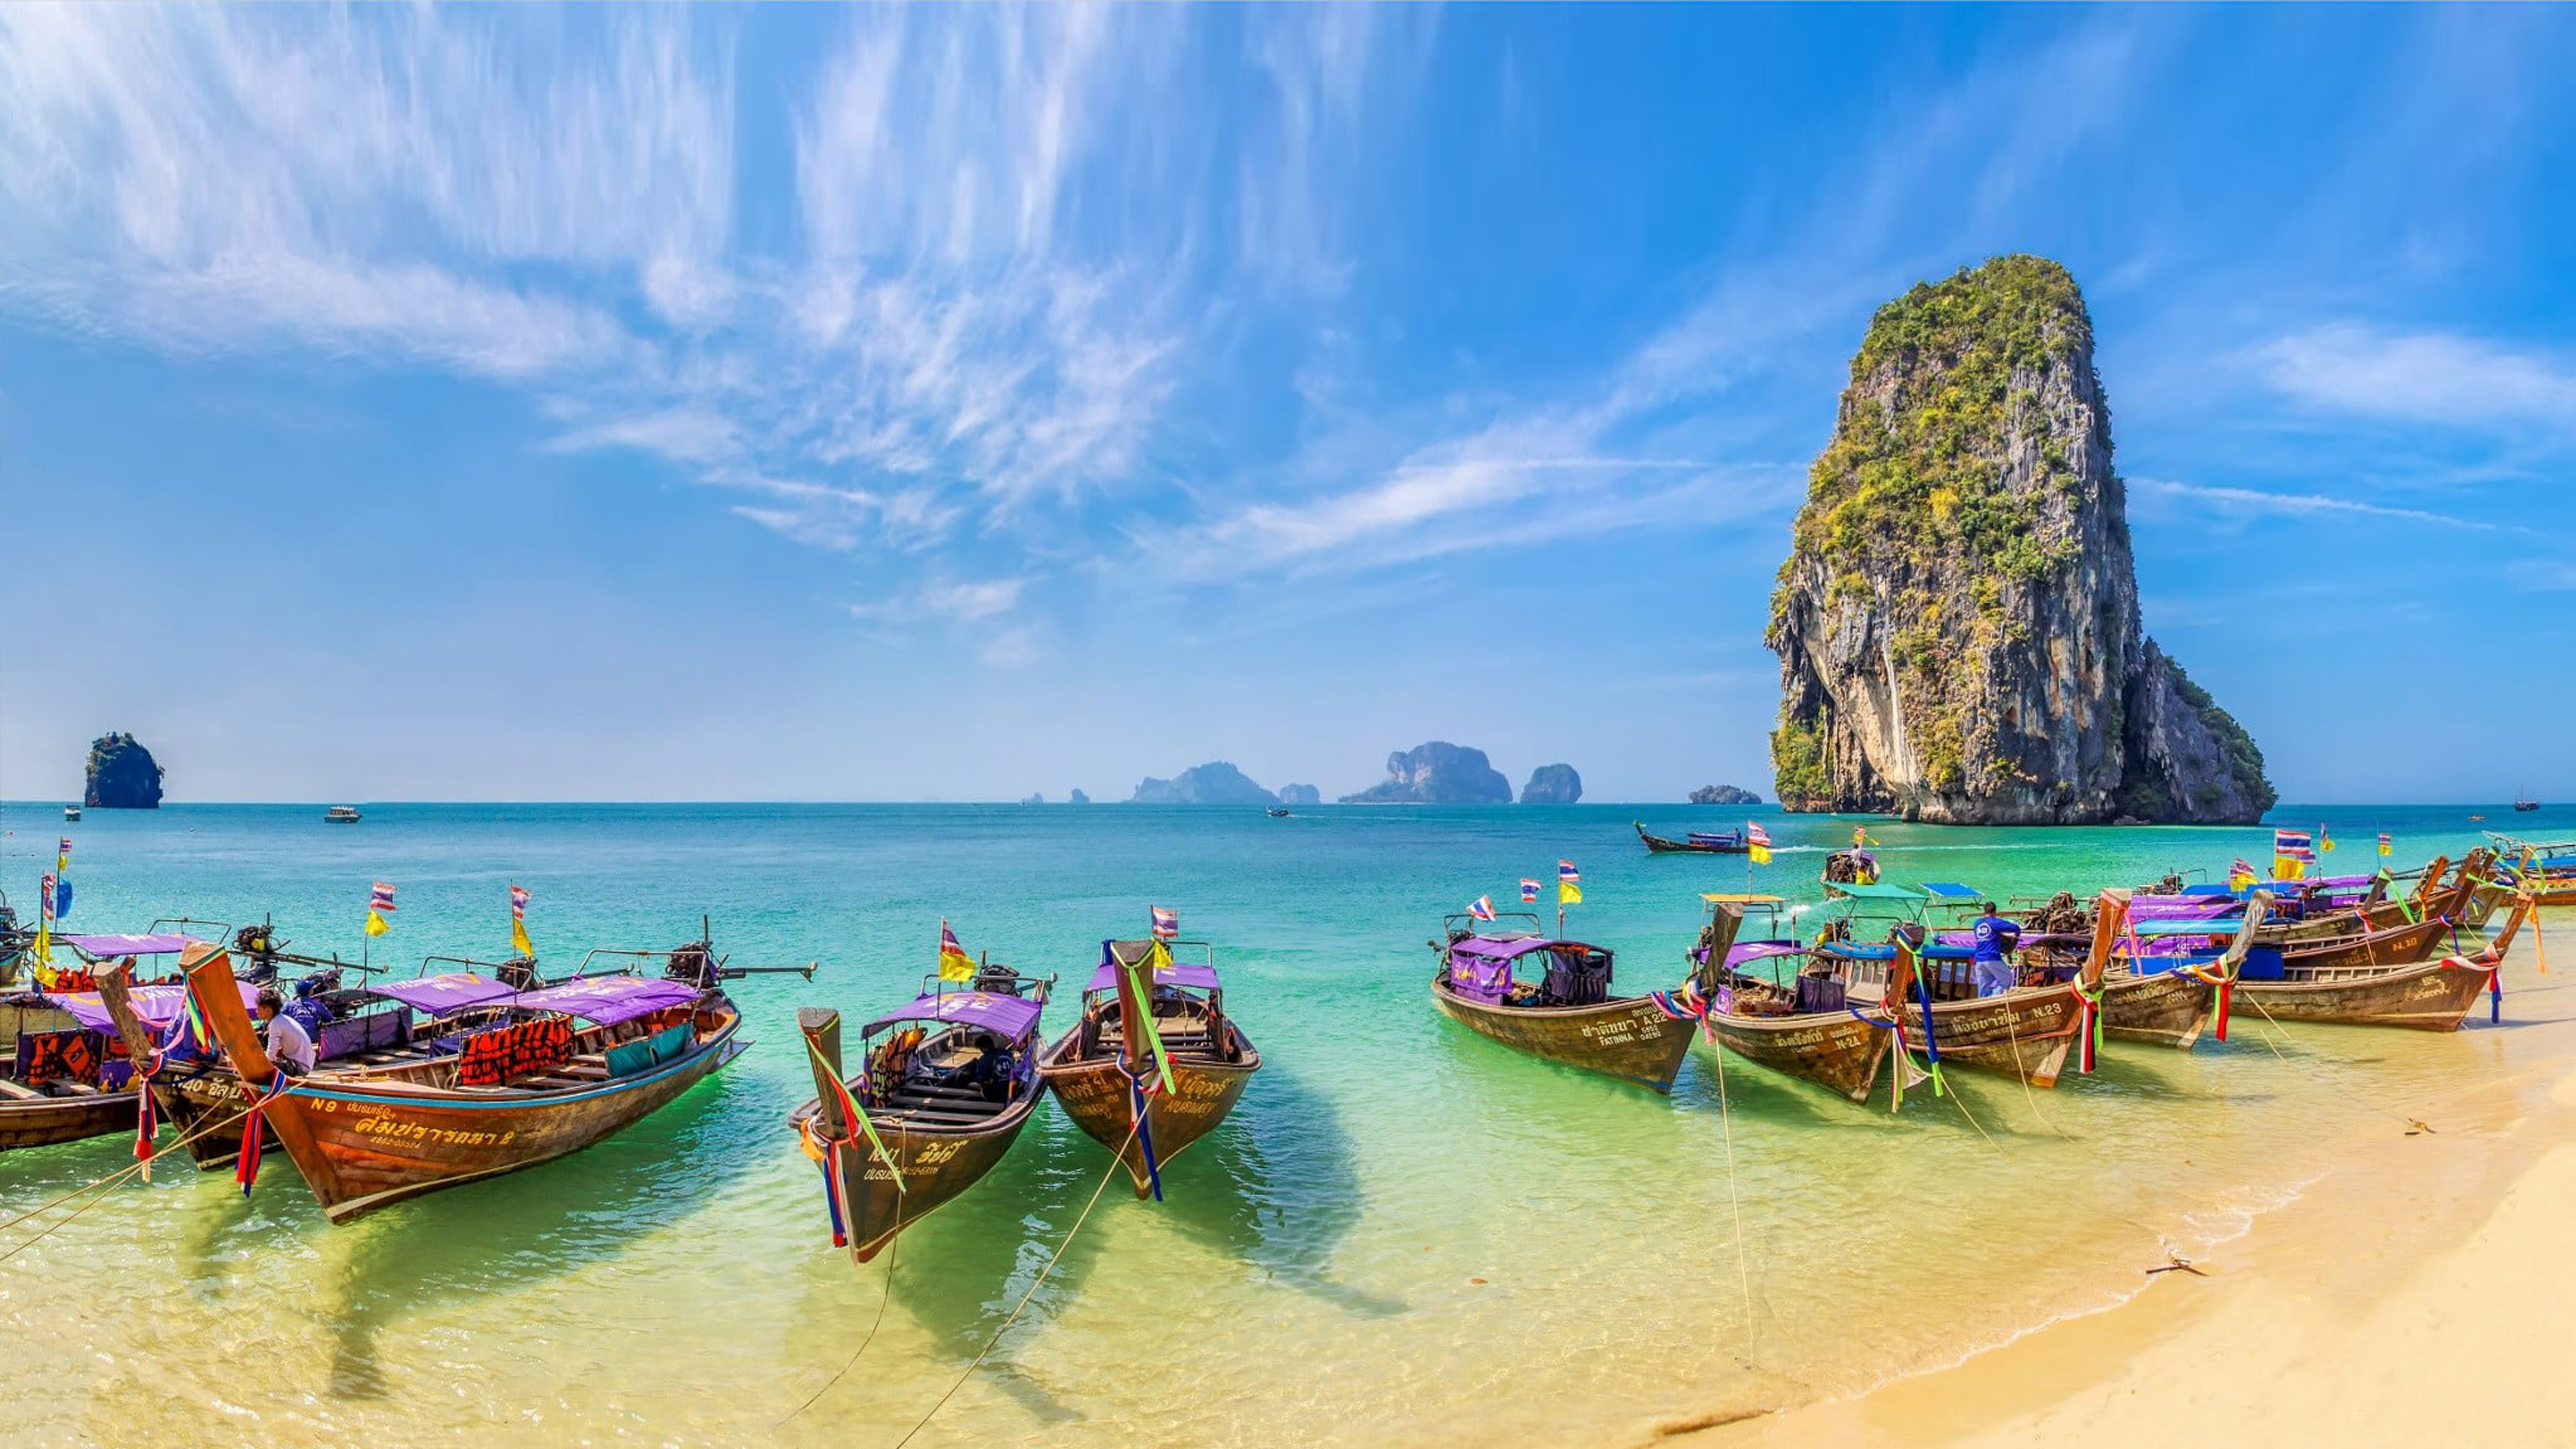 Thailand-Country-in-Asia-the-exotic-island-of-Phuket-beach-sand-boat-limestone-4K-Ultra-HD-Wallpaper-for-Desktop-Laptop-Tablet-Mobile-Phones-And-TV.jpg